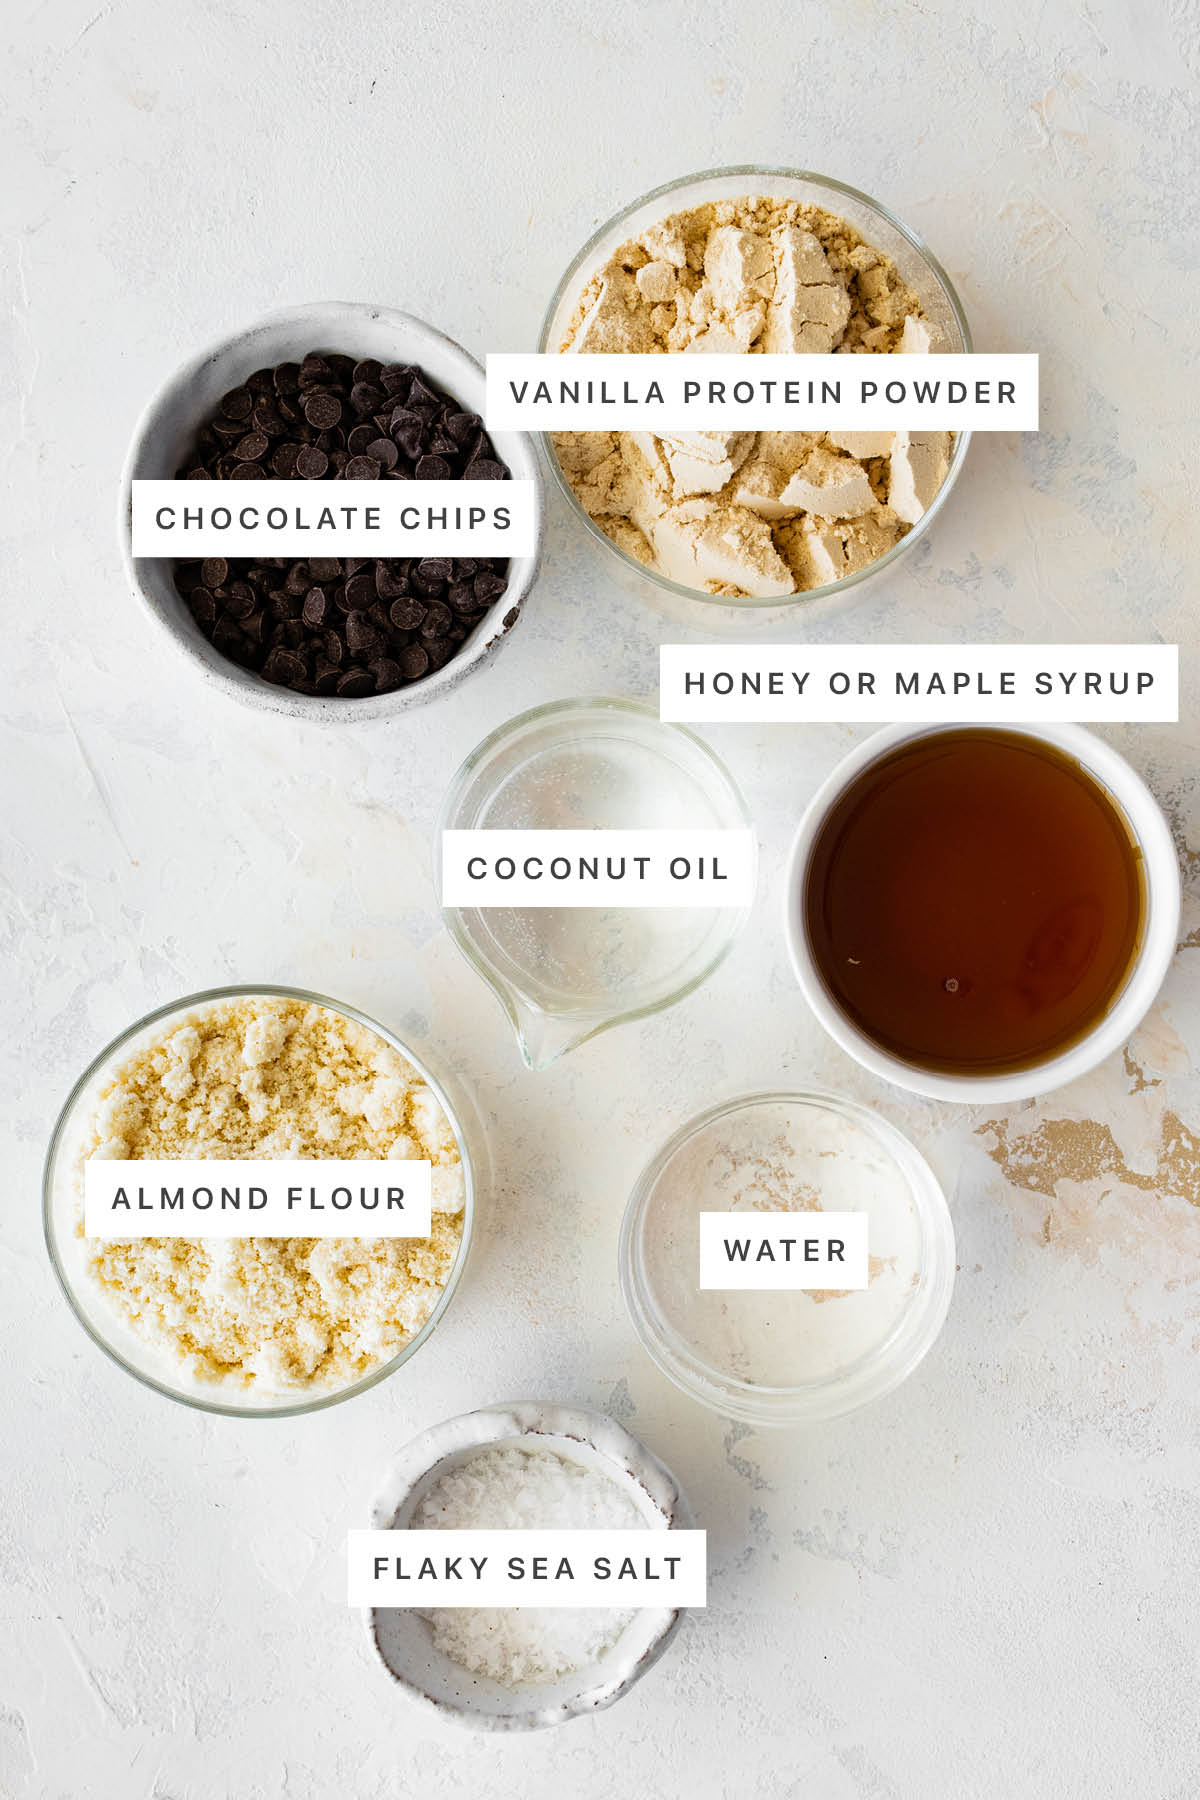 Ingredients measured out to make Protein Cookie Dough Bark: chocolate chips, vanilla protein powder, maple syrup or honey, coconut oil, almond flour, water and flaky sea salt.